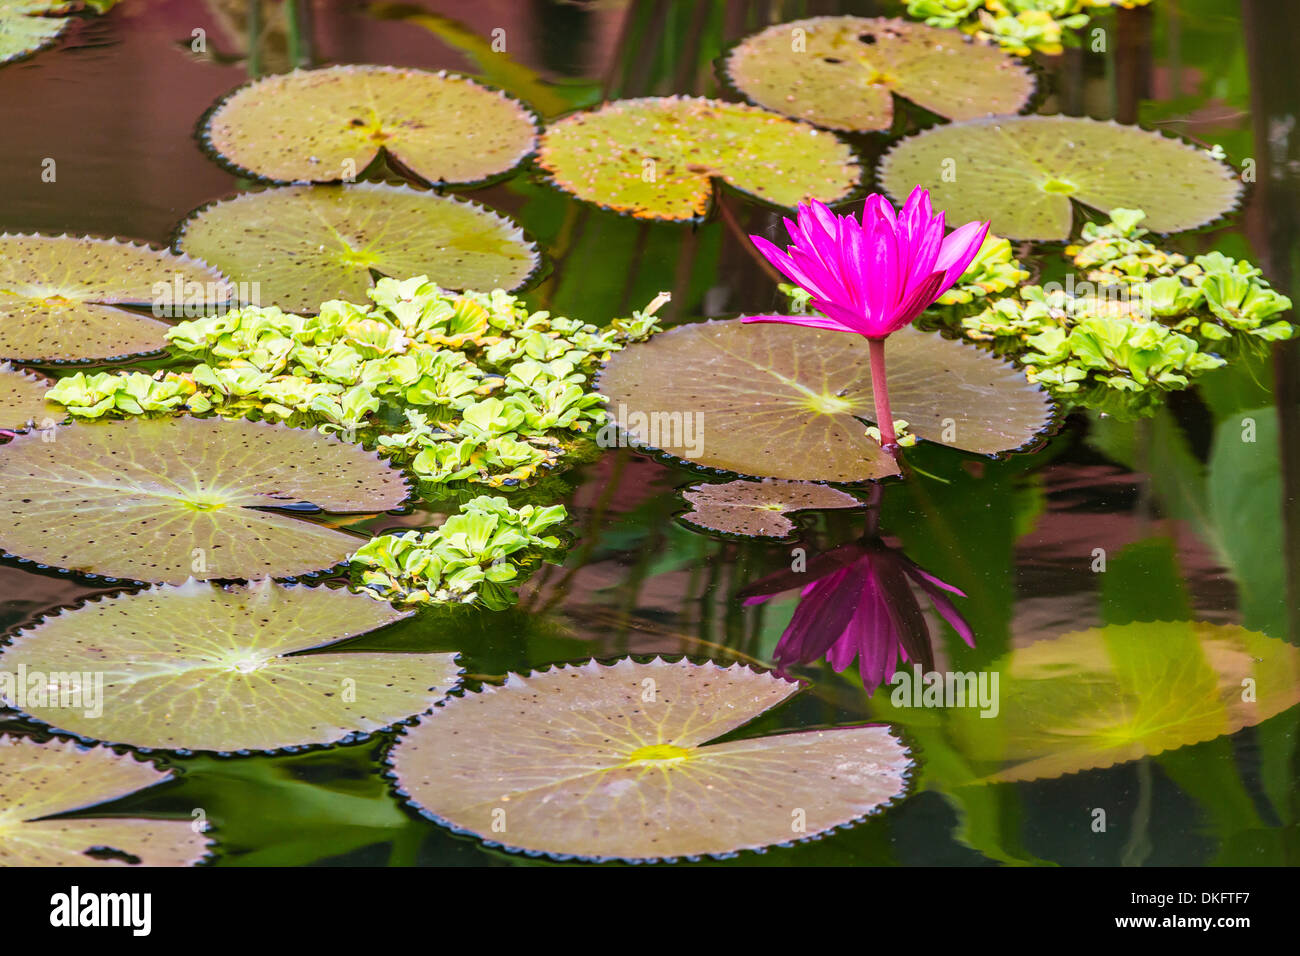 Water-lilies, Nymphaea spp, in Phnom Penh, along the Mekong River, Cambodia, Indochina, Southeast Asia, Asia Stock Photo